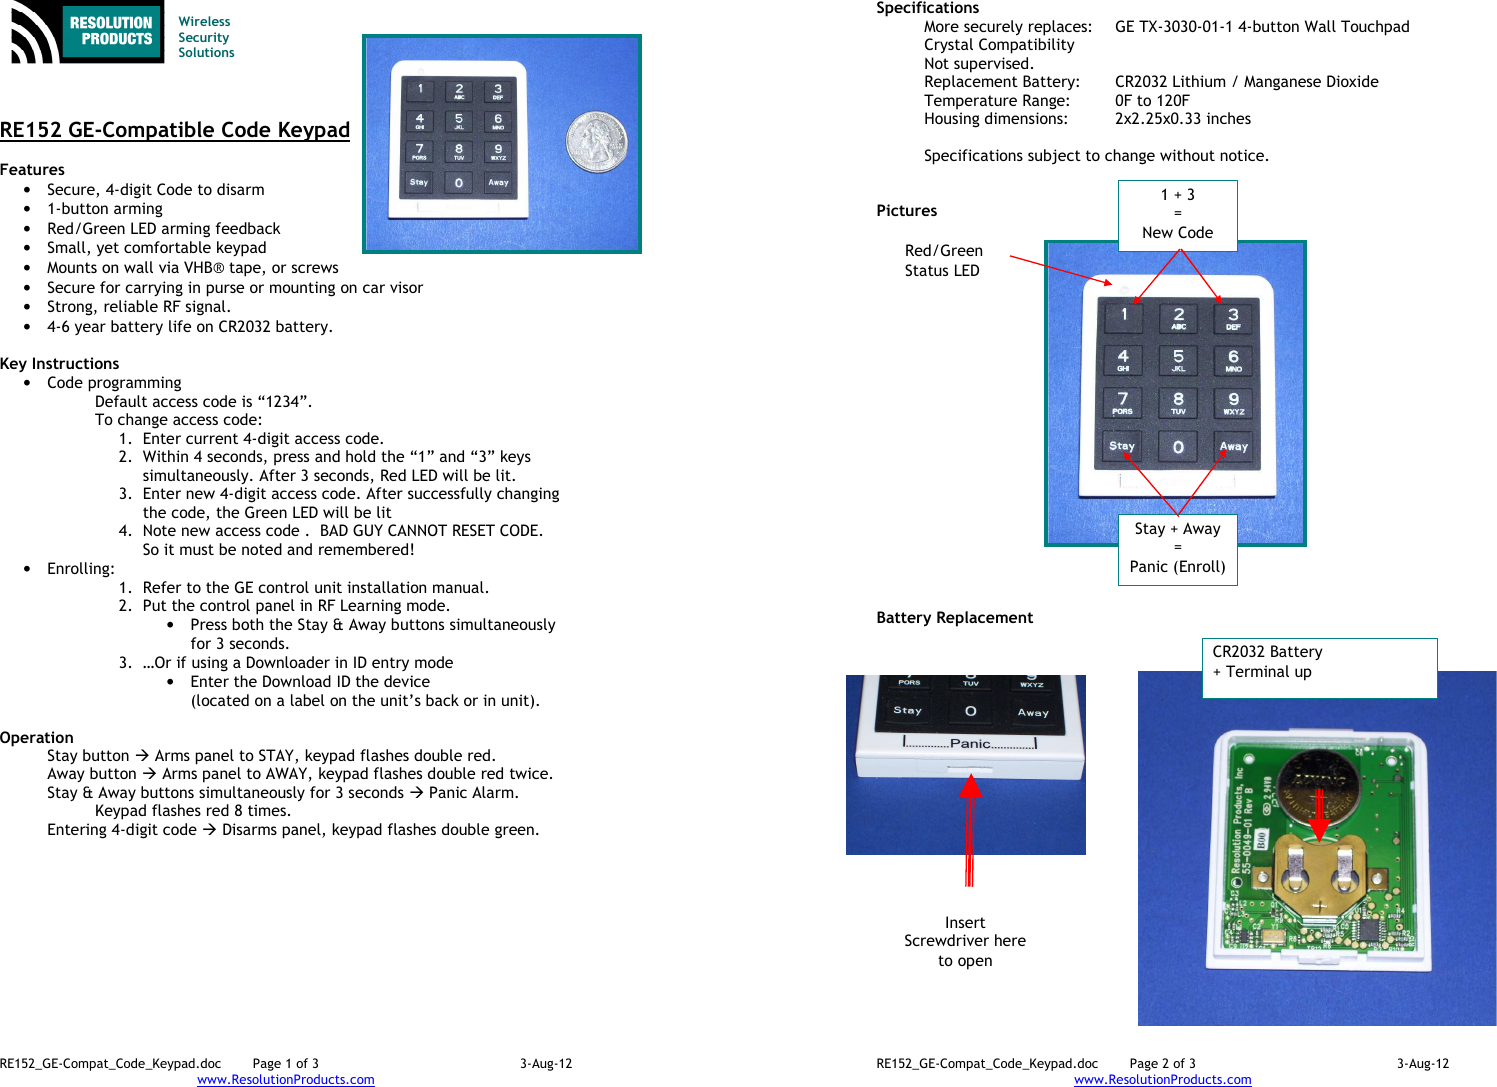 RE152_GE-Compat_Code_Keypad.doc  Page 1 of 3  3-Aug-12 www.ResolutionProducts.com    Wireless  Security  Solutions    RE152 GE-Compatible Code Keypad  Features  • Secure, 4-digit Code to disarm • 1-button arming • Red/Green LED arming feedback • Small, yet comfortable keypad • Mounts on wall via VHB® tape, or screws • Secure for carrying in purse or mounting on car visor • Strong, reliable RF signal. • 4-6 year battery life on CR2032 battery.  Key Instructions • Code programming Default access code is “1234”.  To change access code: 1. Enter current 4-digit access code. 2. Within 4 seconds, press and hold the “1” and “3” keys simultaneously. After 3 seconds, Red LED will be lit. 3. Enter new 4-digit access code. After successfully changing the code, the Green LED will be lit 4. Note new access code .  BAD GUY CANNOT RESET CODE. So it must be noted and remembered! • Enrolling:   1. Refer to the GE control unit installation manual. 2. Put the control panel in RF Learning mode. • Press both the Stay &amp; Away buttons simultaneously for 3 seconds. 3. …Or if using a Downloader in ID entry mode  • Enter the Download ID the device  (located on a label on the unit’s back or in unit).  Operation  Stay button  Arms panel to STAY, keypad flashes double red. Away button  Arms panel to AWAY, keypad flashes double red twice. Stay &amp; Away buttons simultaneously for 3 seconds  Panic Alarm. Keypad flashes red 8 times. Entering 4-digit code  Disarms panel, keypad flashes double green.  RE152_GE-Compat_Code_Keypad.doc  Page 2 of 3  3-Aug-12 www.ResolutionProducts.com  Specifications   More securely replaces:  GE TX-3030-01-1 4-button Wall Touchpad Crystal Compatibility Not supervised. Replacement Battery:  CR2032 Lithium / Manganese Dioxide Temperature Range:  0F to 120F Housing dimensions:  2x2.25x0.33 inches  Specifications subject to change without notice.   Pictures                      Battery Replacement CR2032 Battery + Terminal up Insert Screwdriver here to open Red/Green  Status LED Stay + Away = Panic (Enroll) 1 + 3 = New Code 